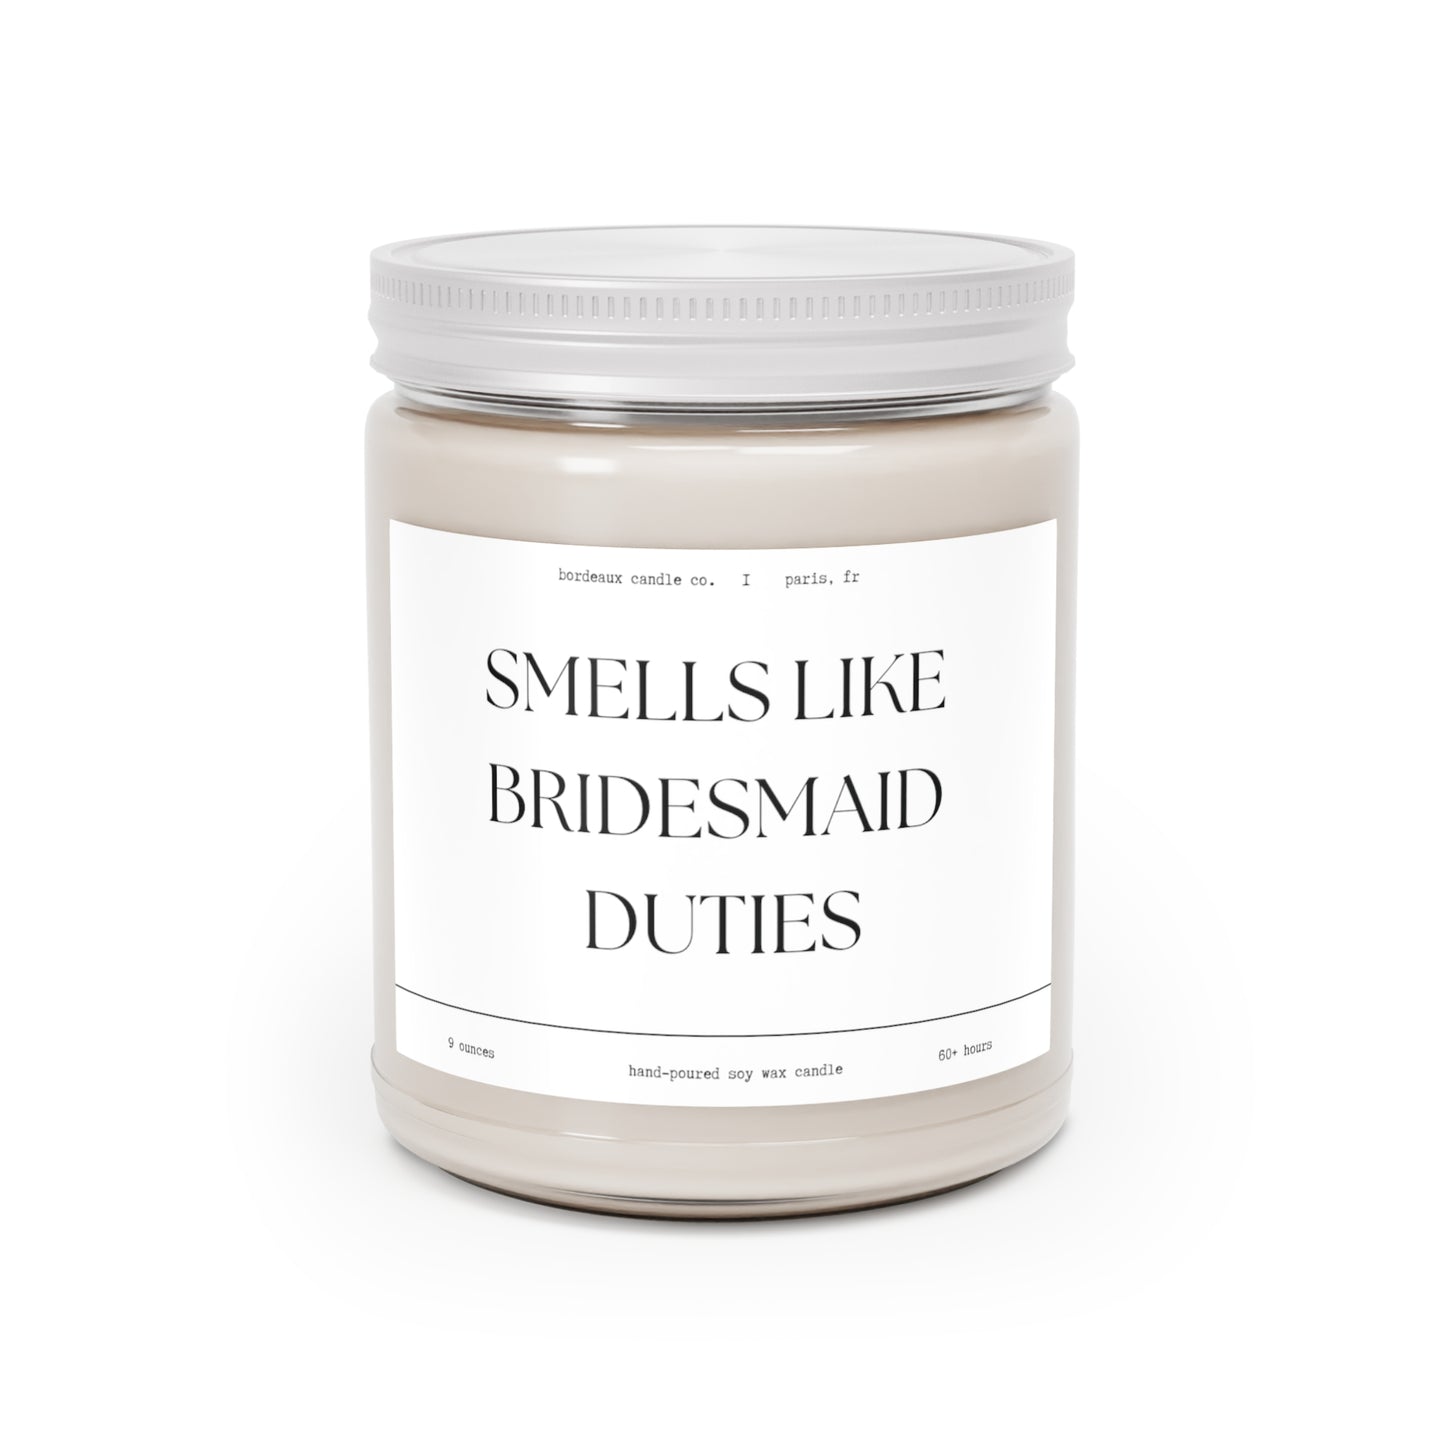 Smells like Bridesmaid Duties, Scented Candle, 9oz